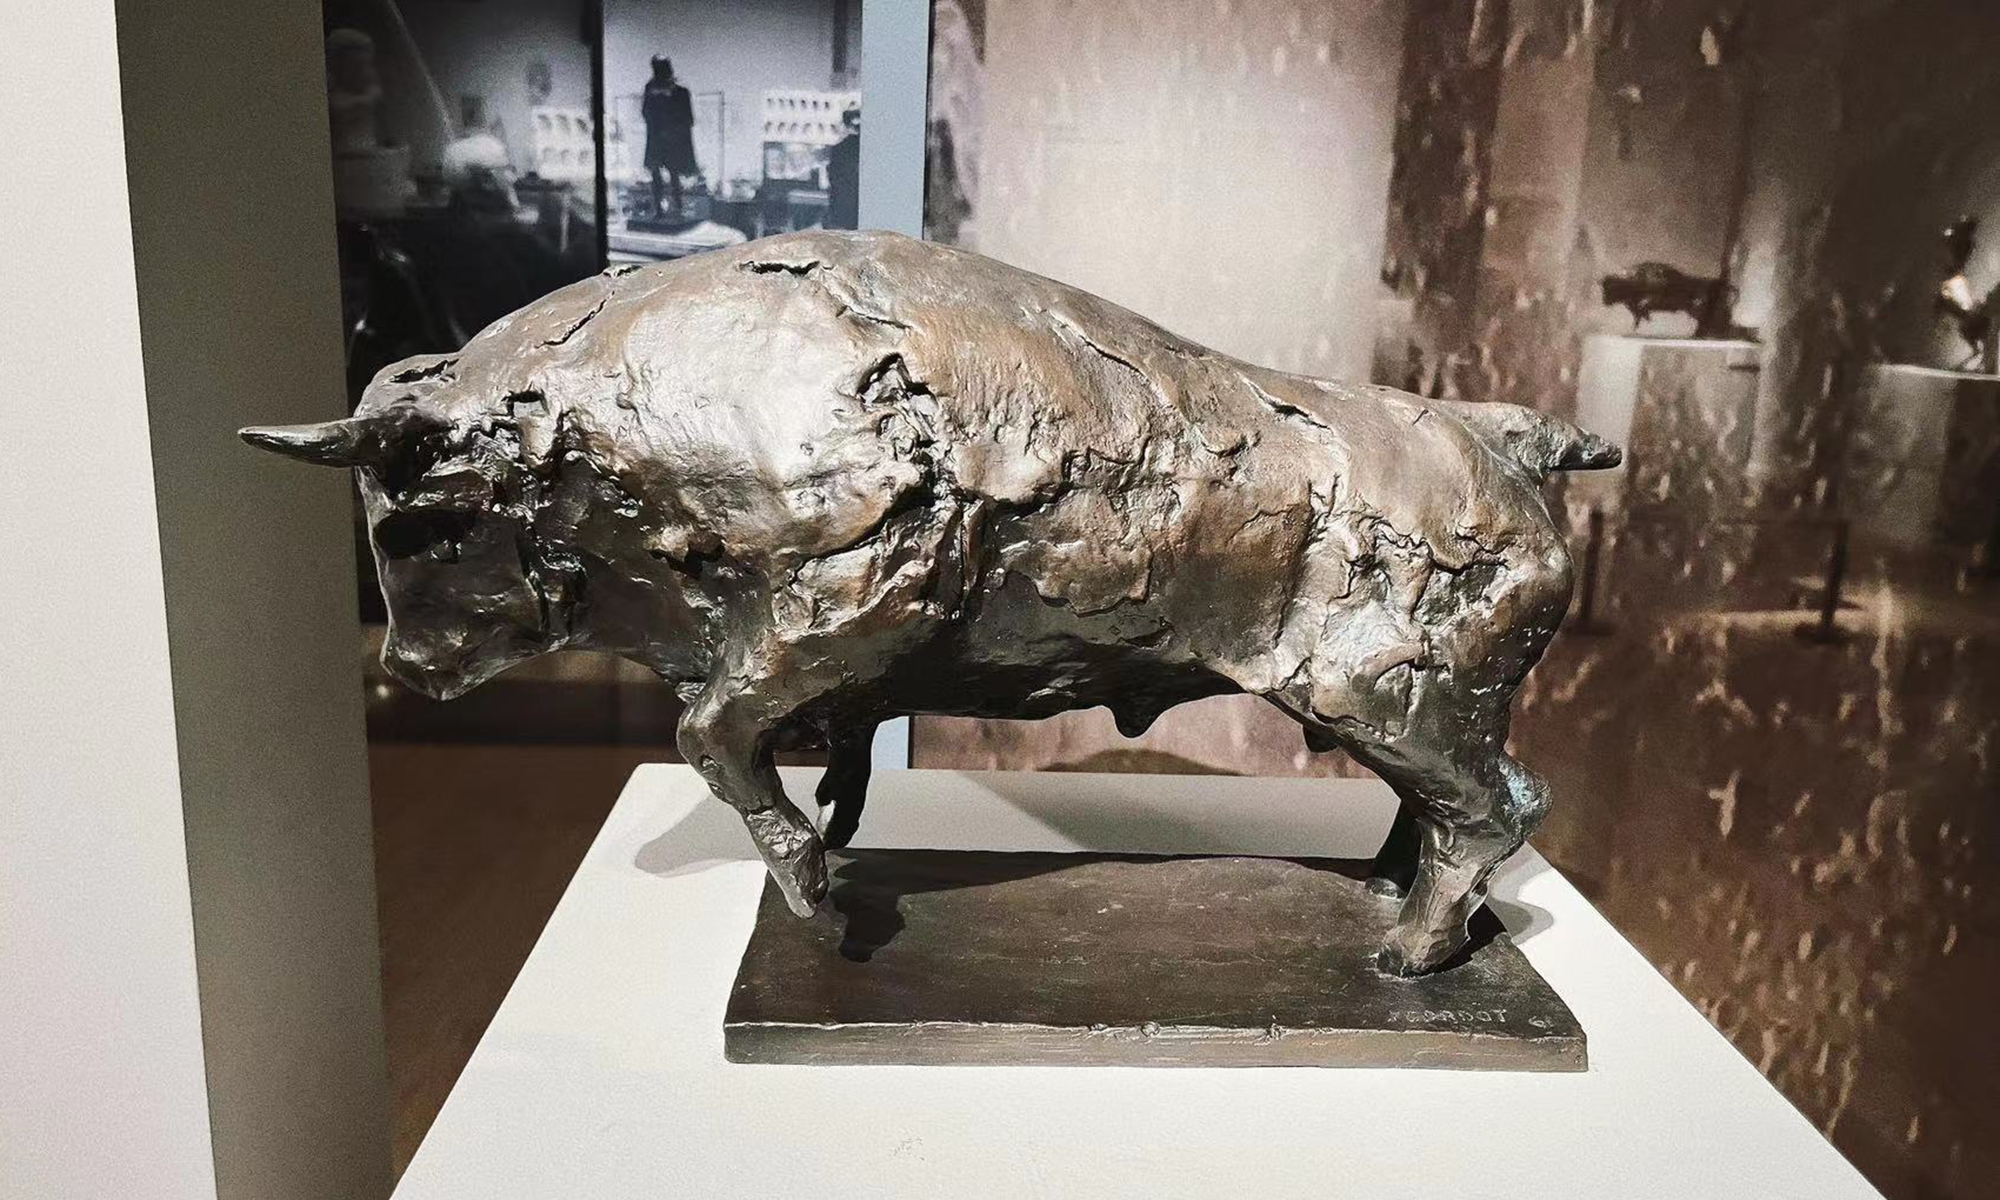 Sculptures by French artist Jean Cardot displayed at China’s national art museum